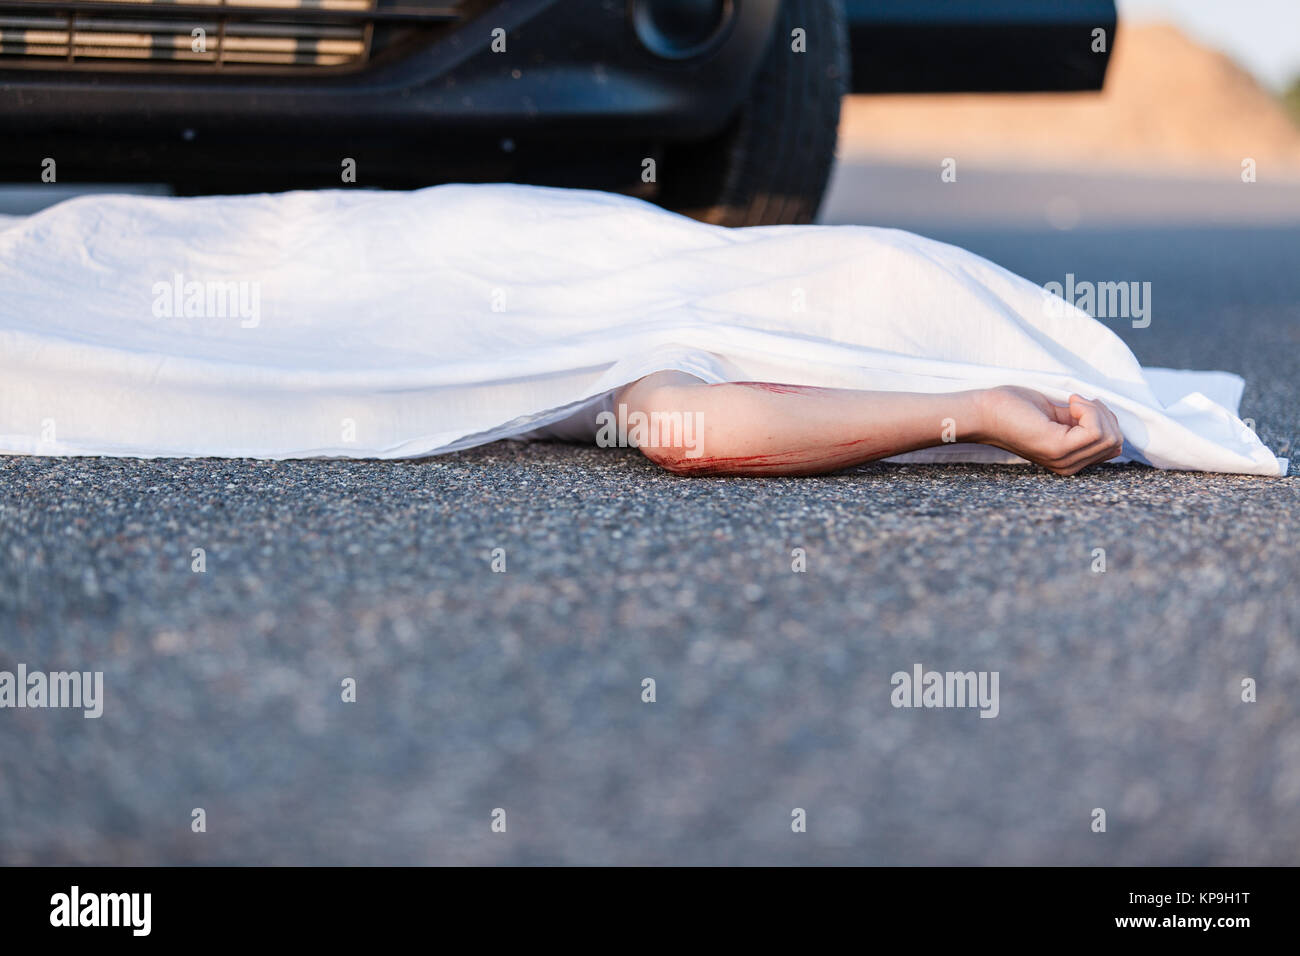 Body of a young child covered by a sheet Stock Photo